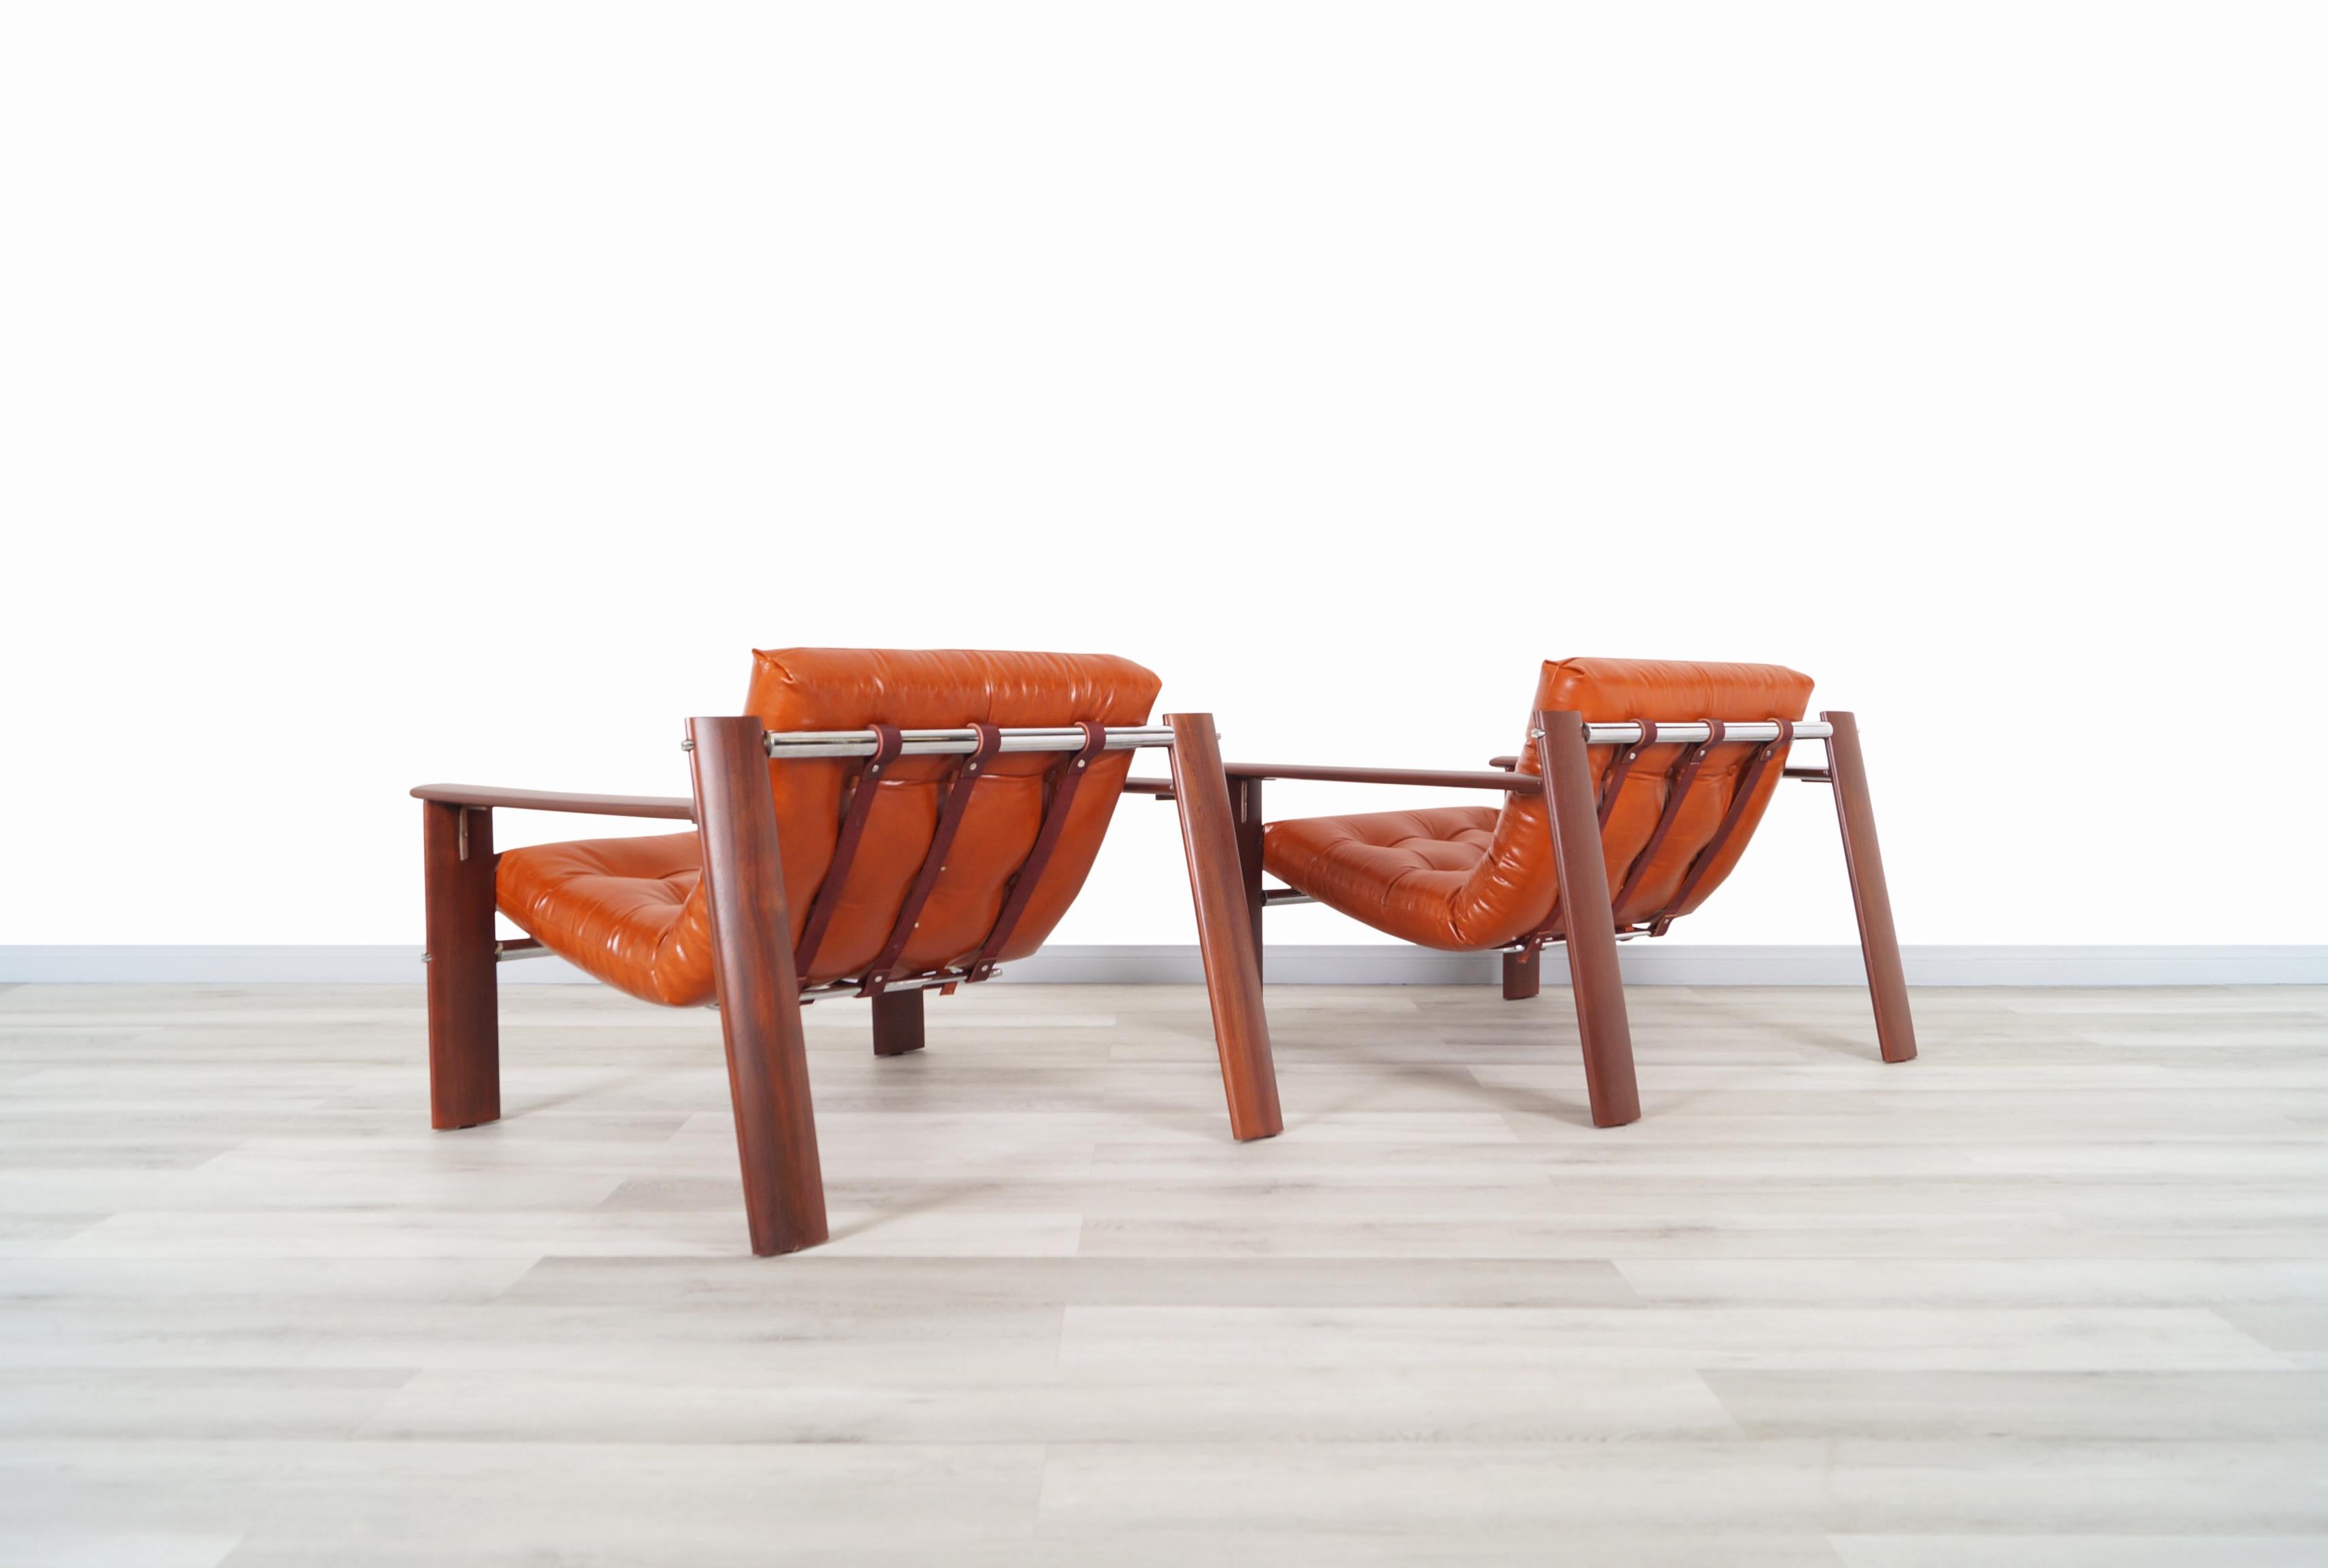 Late 20th Century Vintage Brazilian MP-129 Jacaranda and Leather Lounge Chairs by Percival Lafer